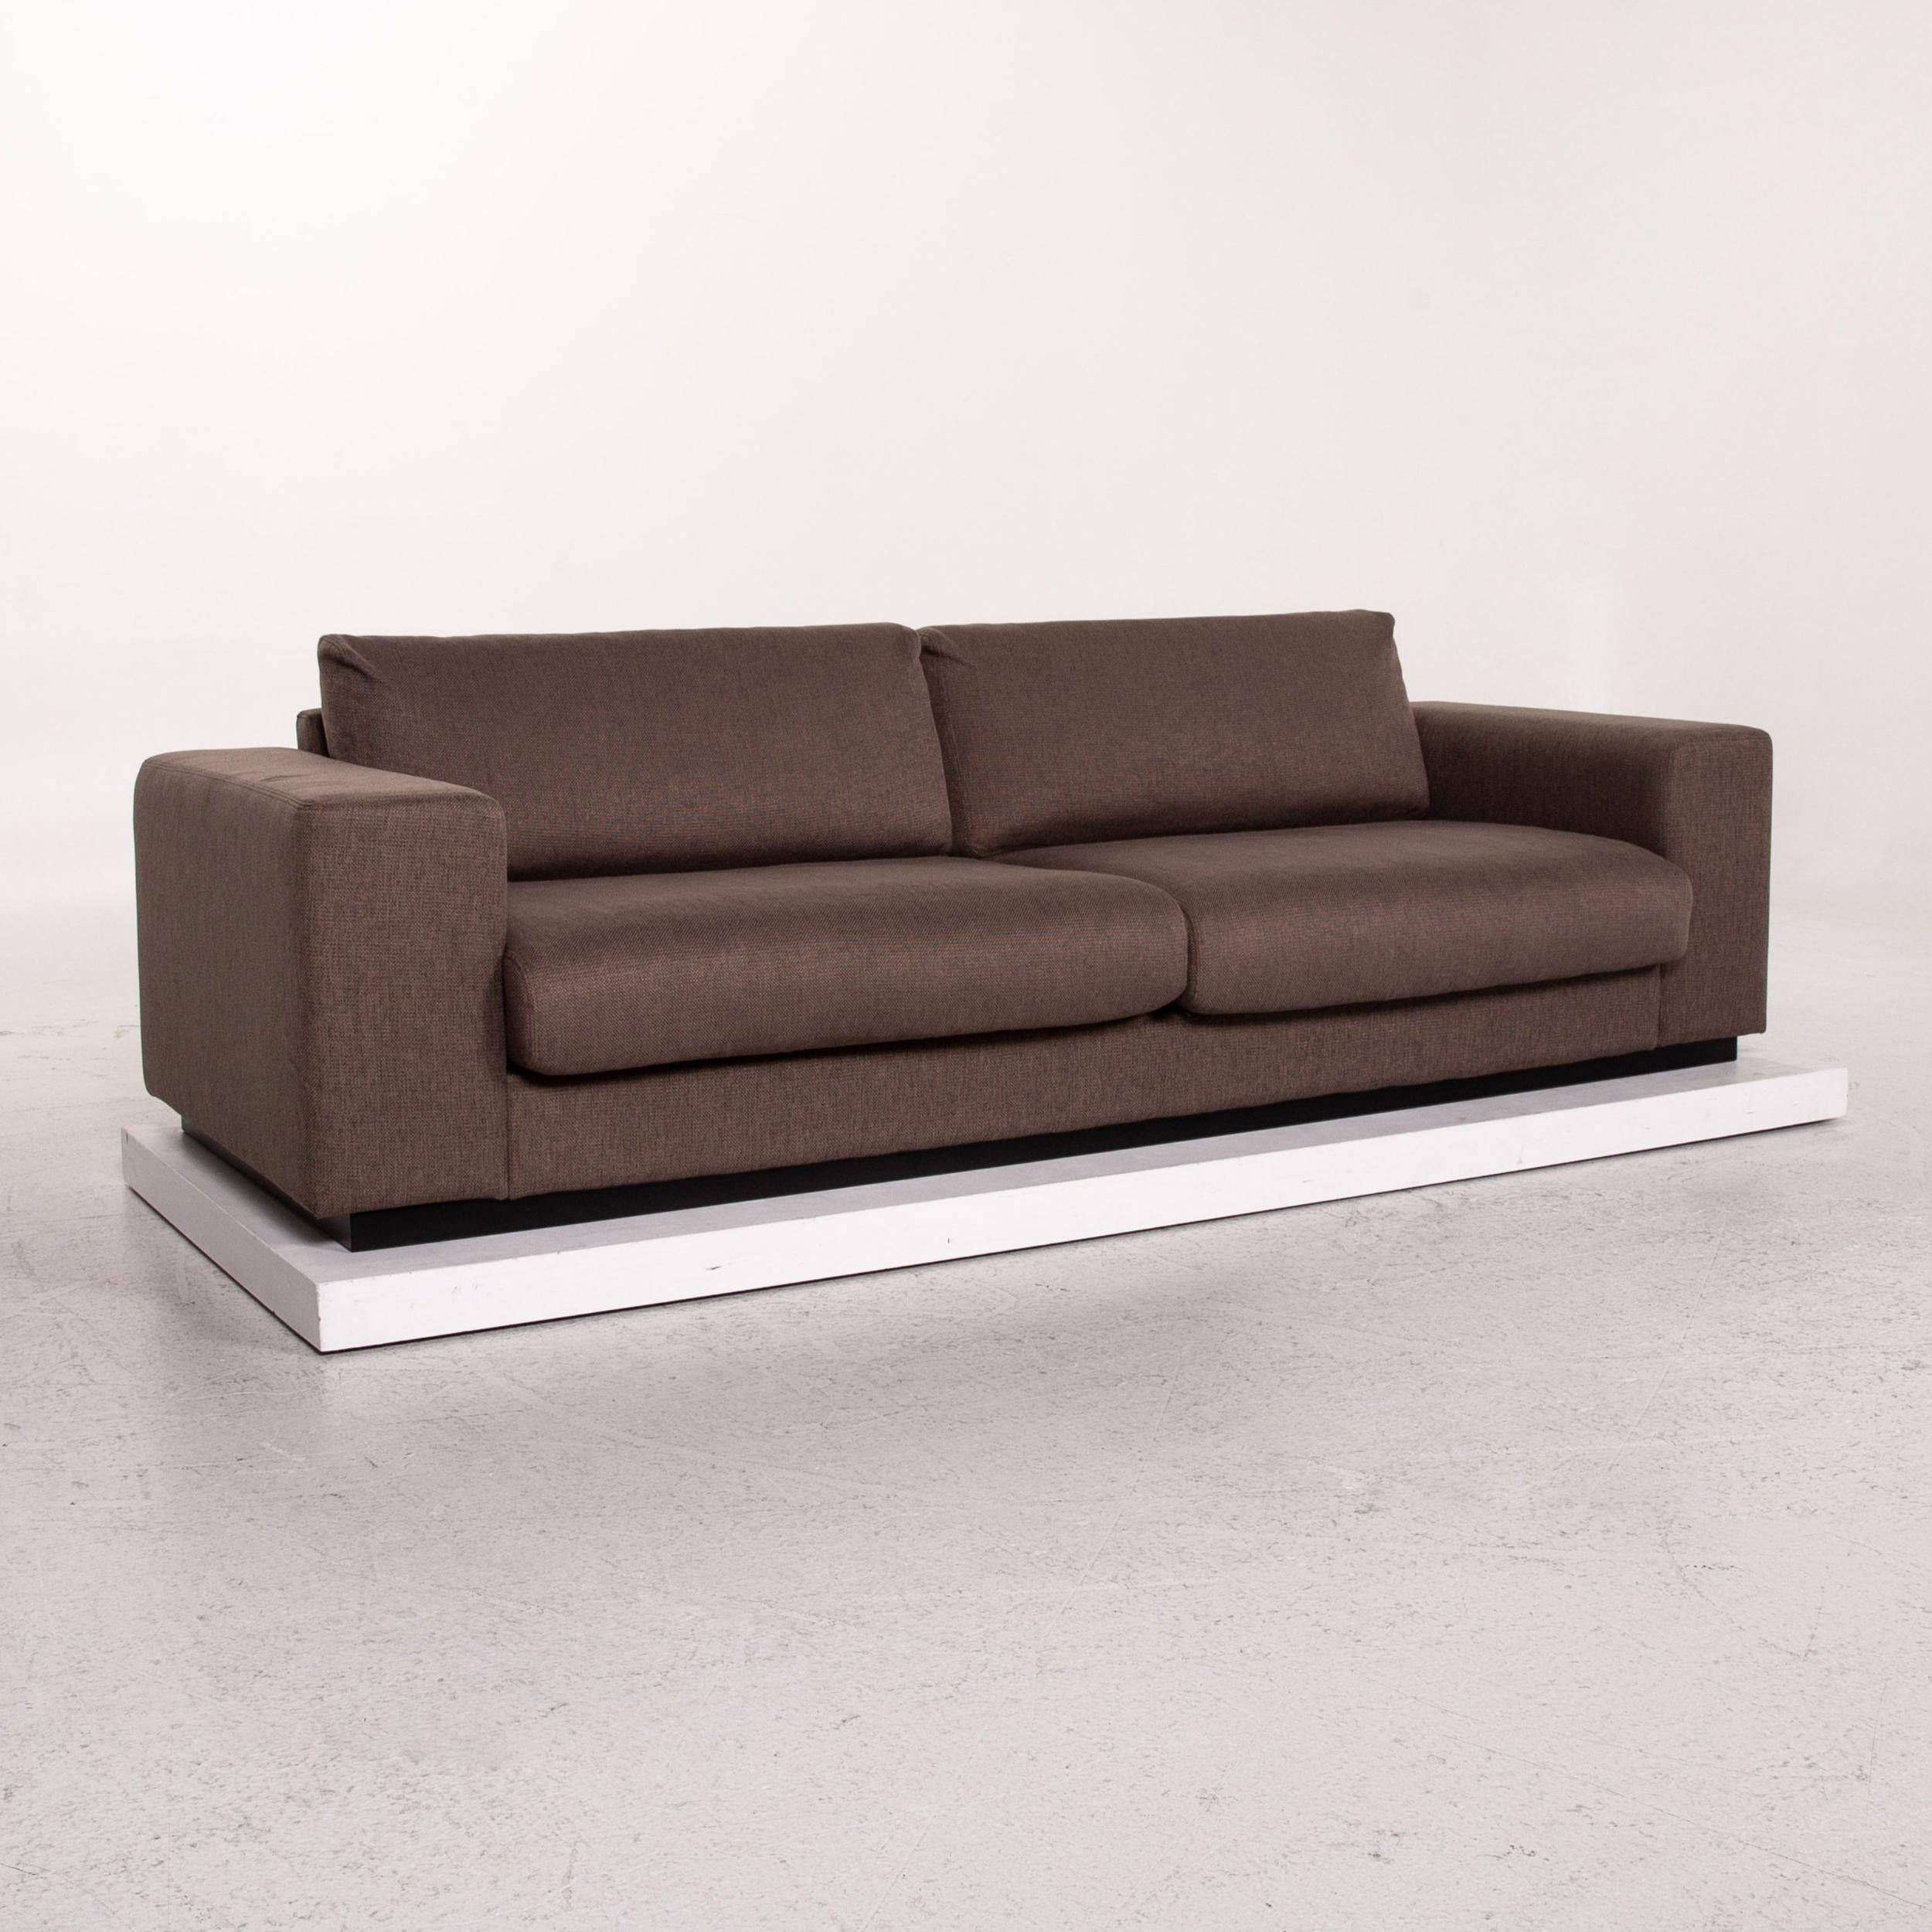 Modern Bolia Sepia Fabric Sofa Brown Three-Seat Couch For Sale